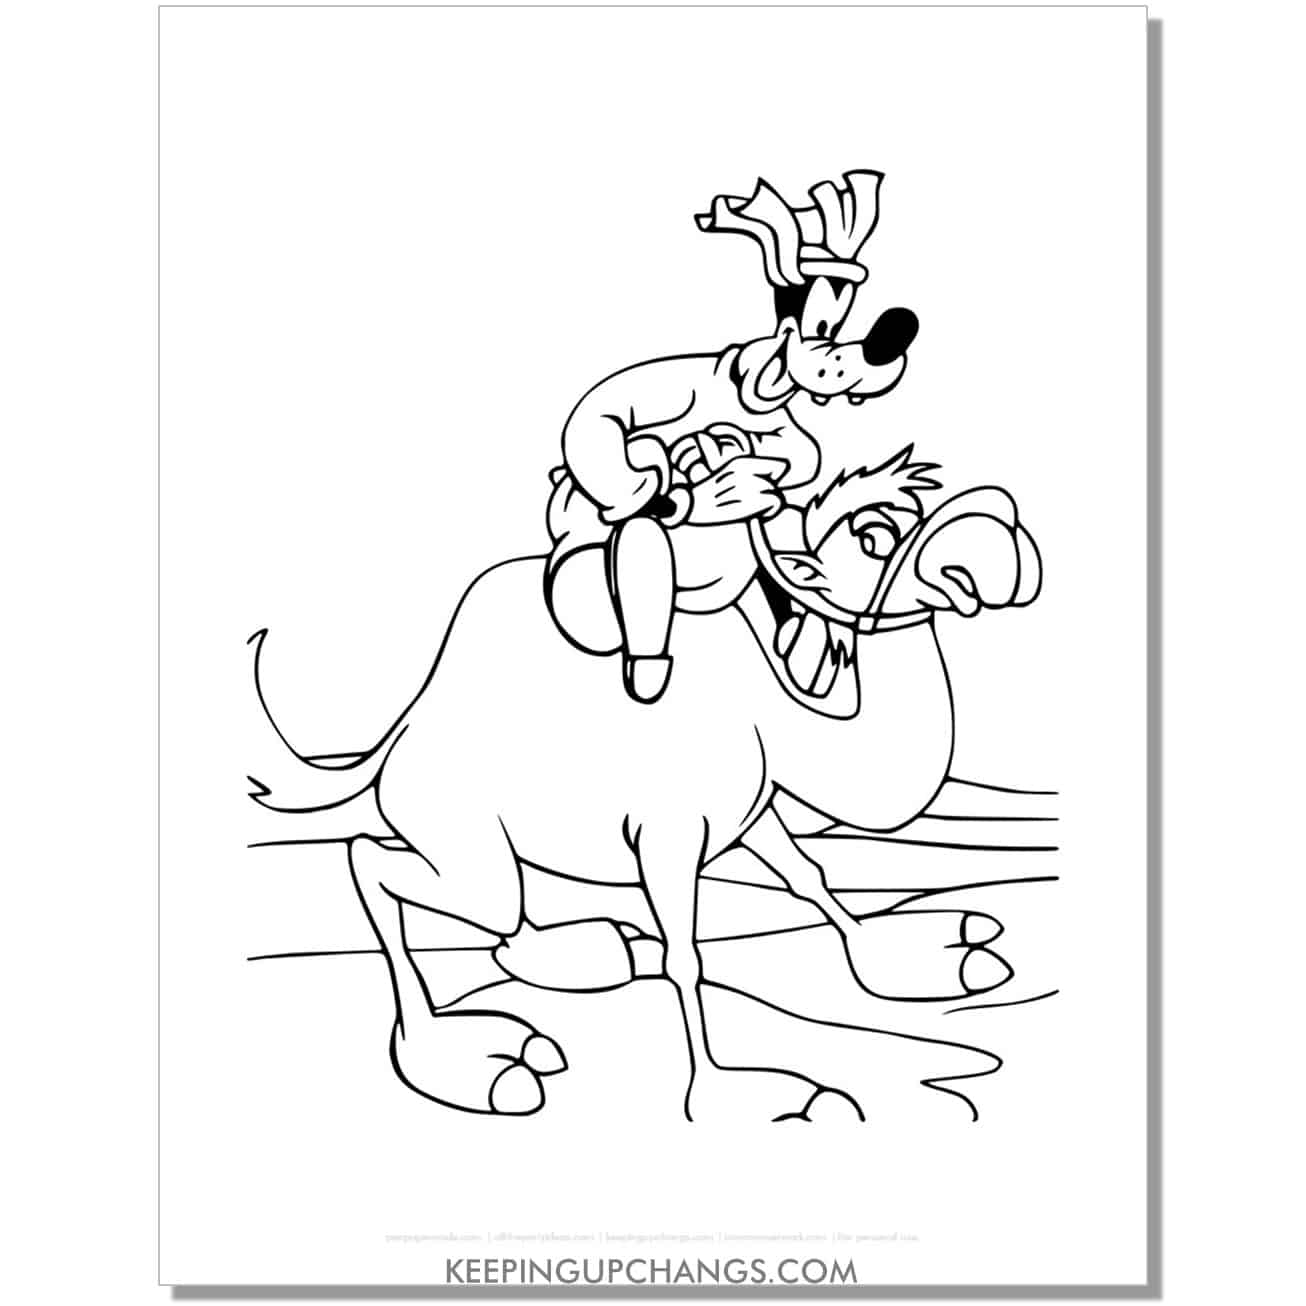 free goofy on camel's back coloring page, sheet.